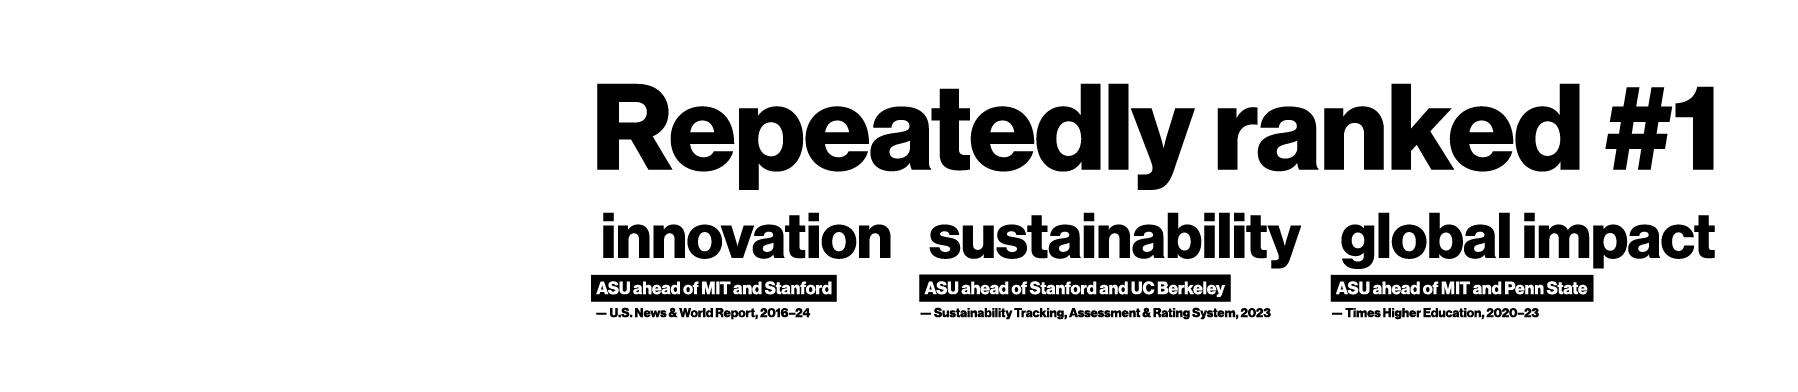 Number one in the U.S. for innovation. #1 ASU, #2 Stanford, #3 MIT. - U.S. News and World Report, 5 years, 2016-2020